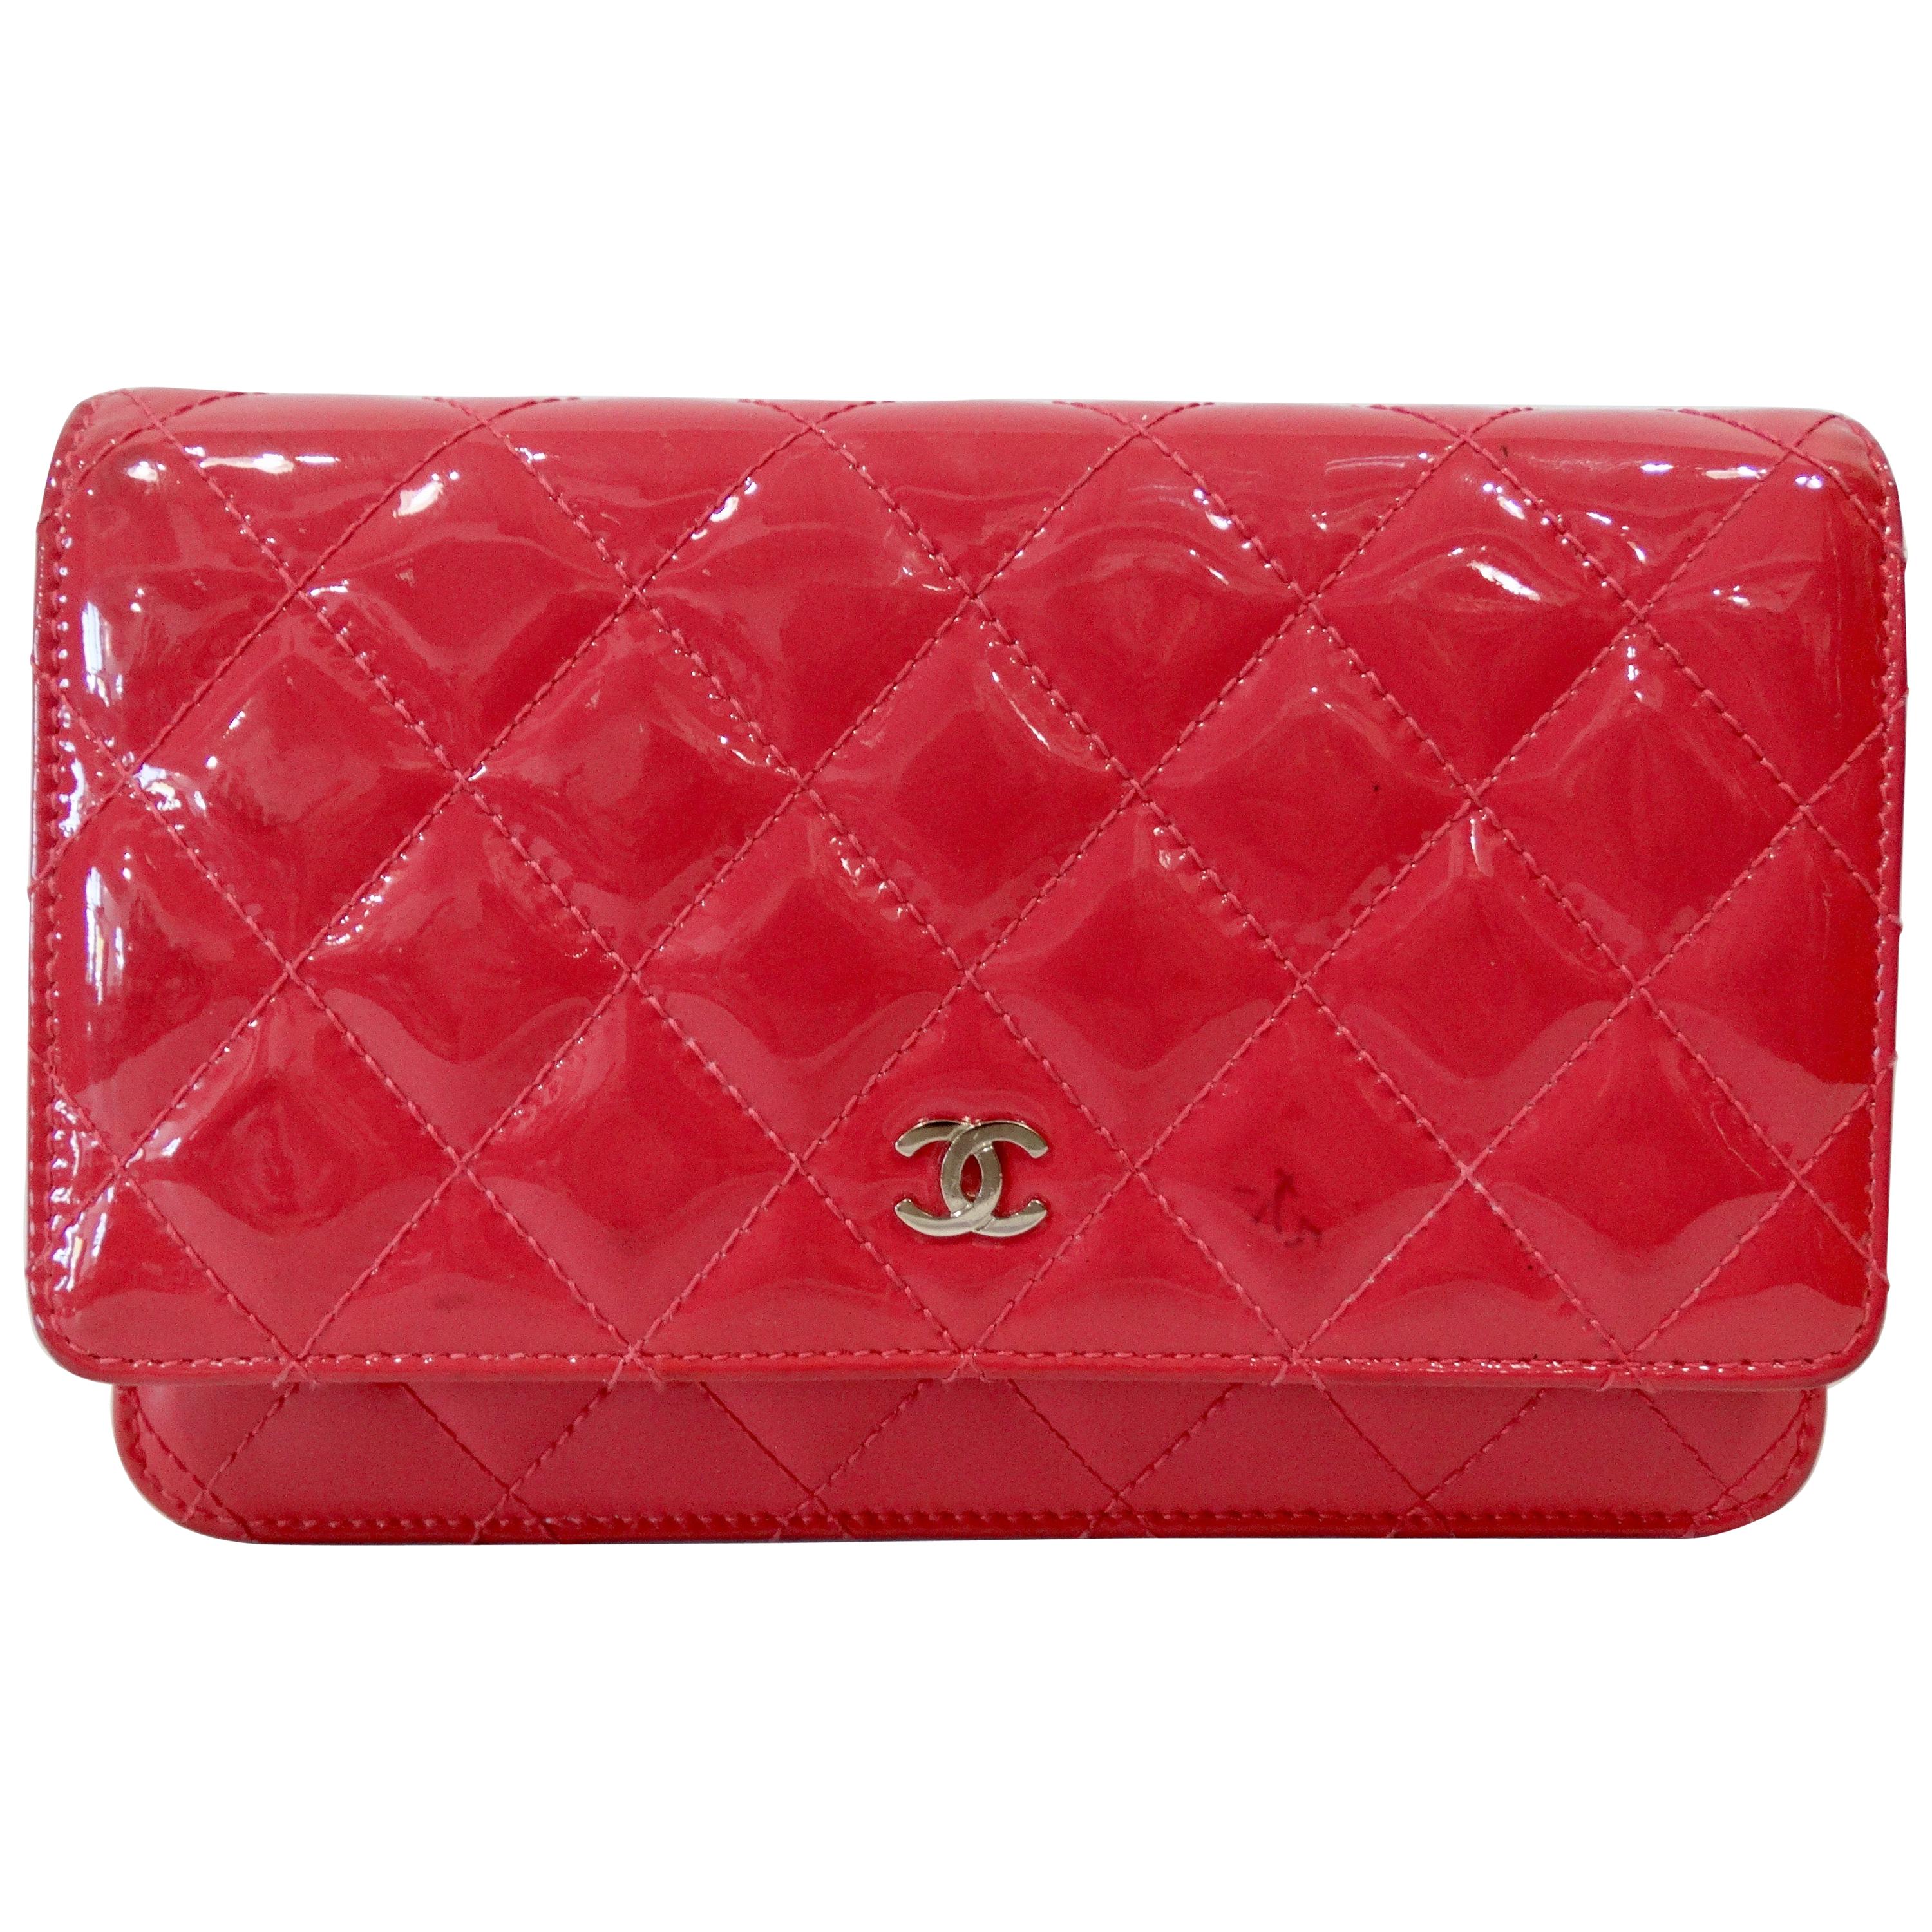 Chanel 2014 Quilted Patent Leather Wallet Crossbody Bag 